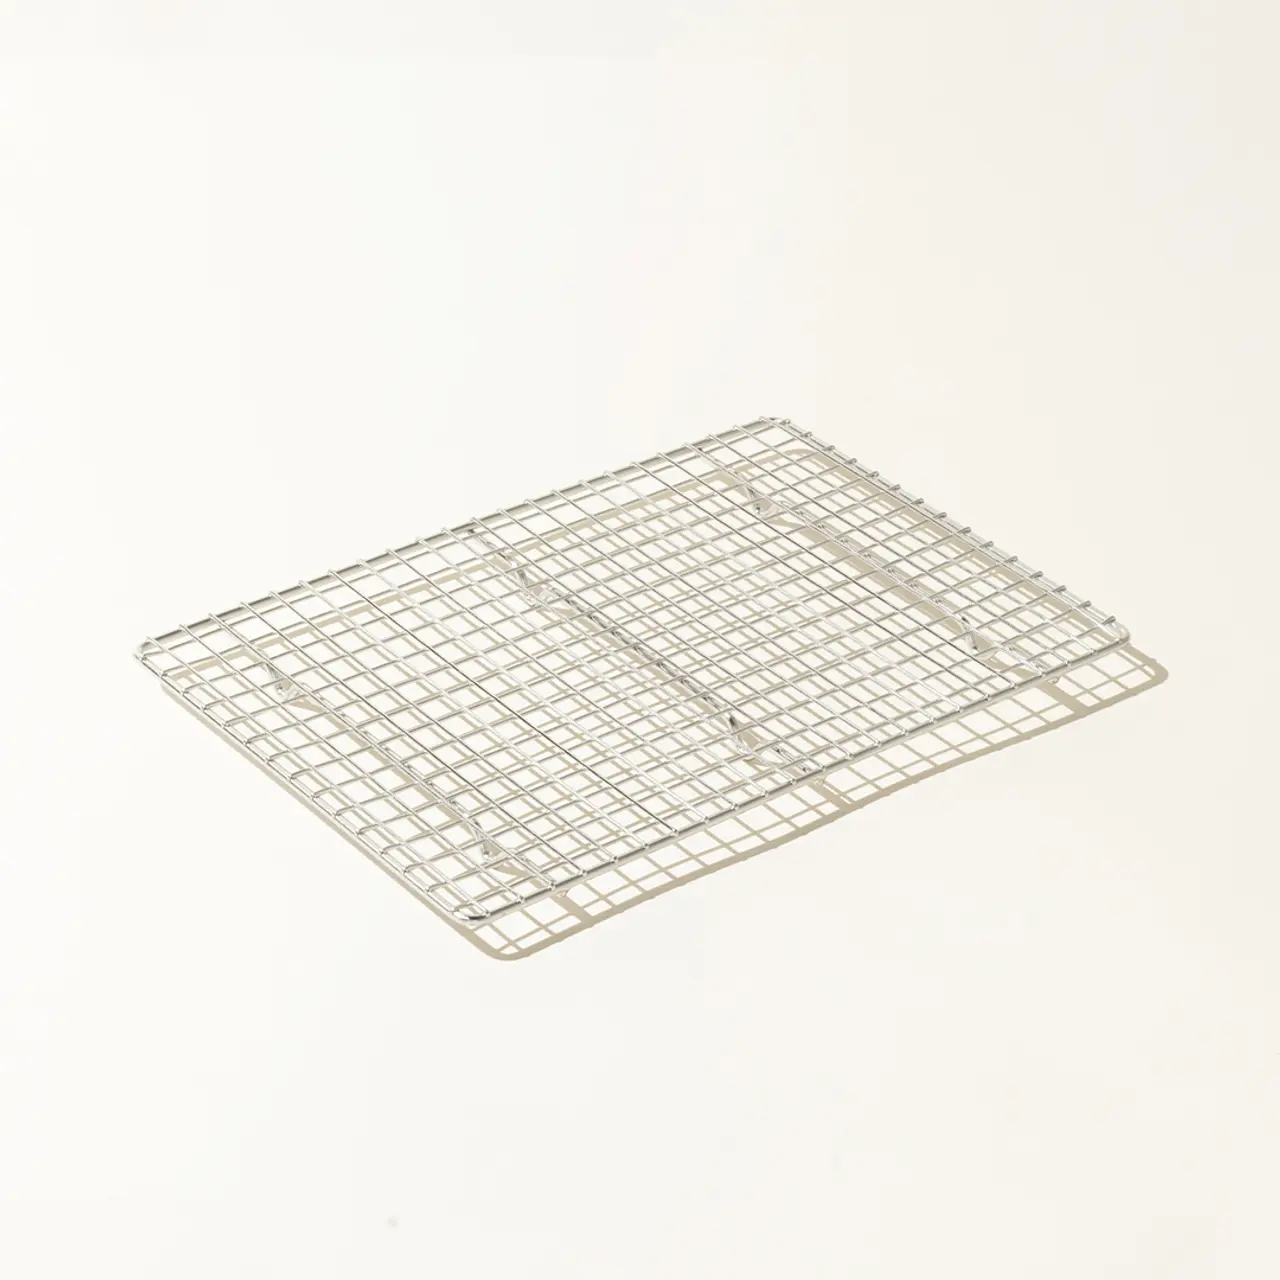 A metal cooling rack sits on a plain light-colored background.